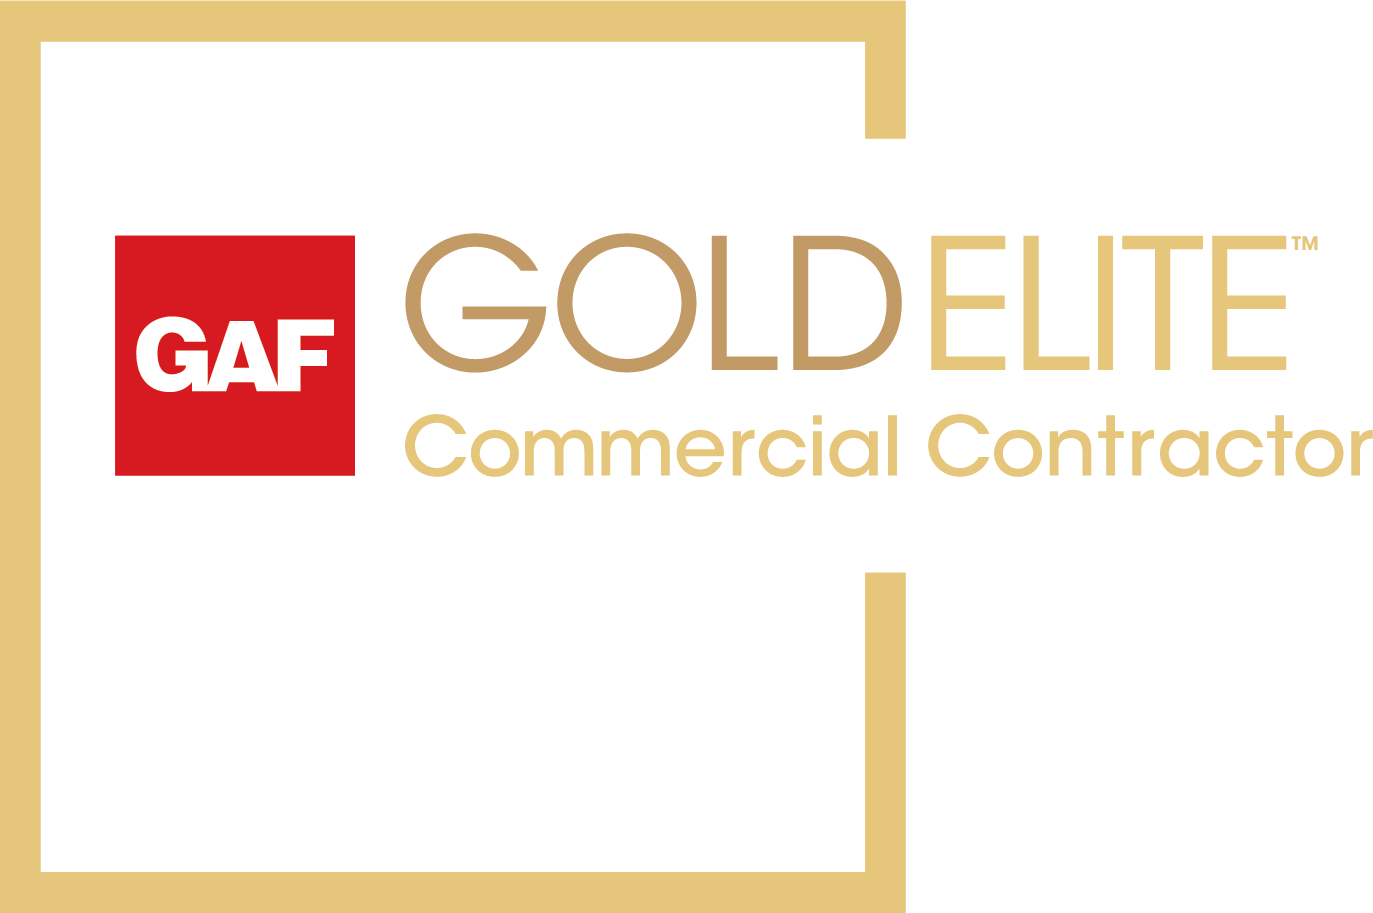 Gold Elite Commerical Contractor Logo